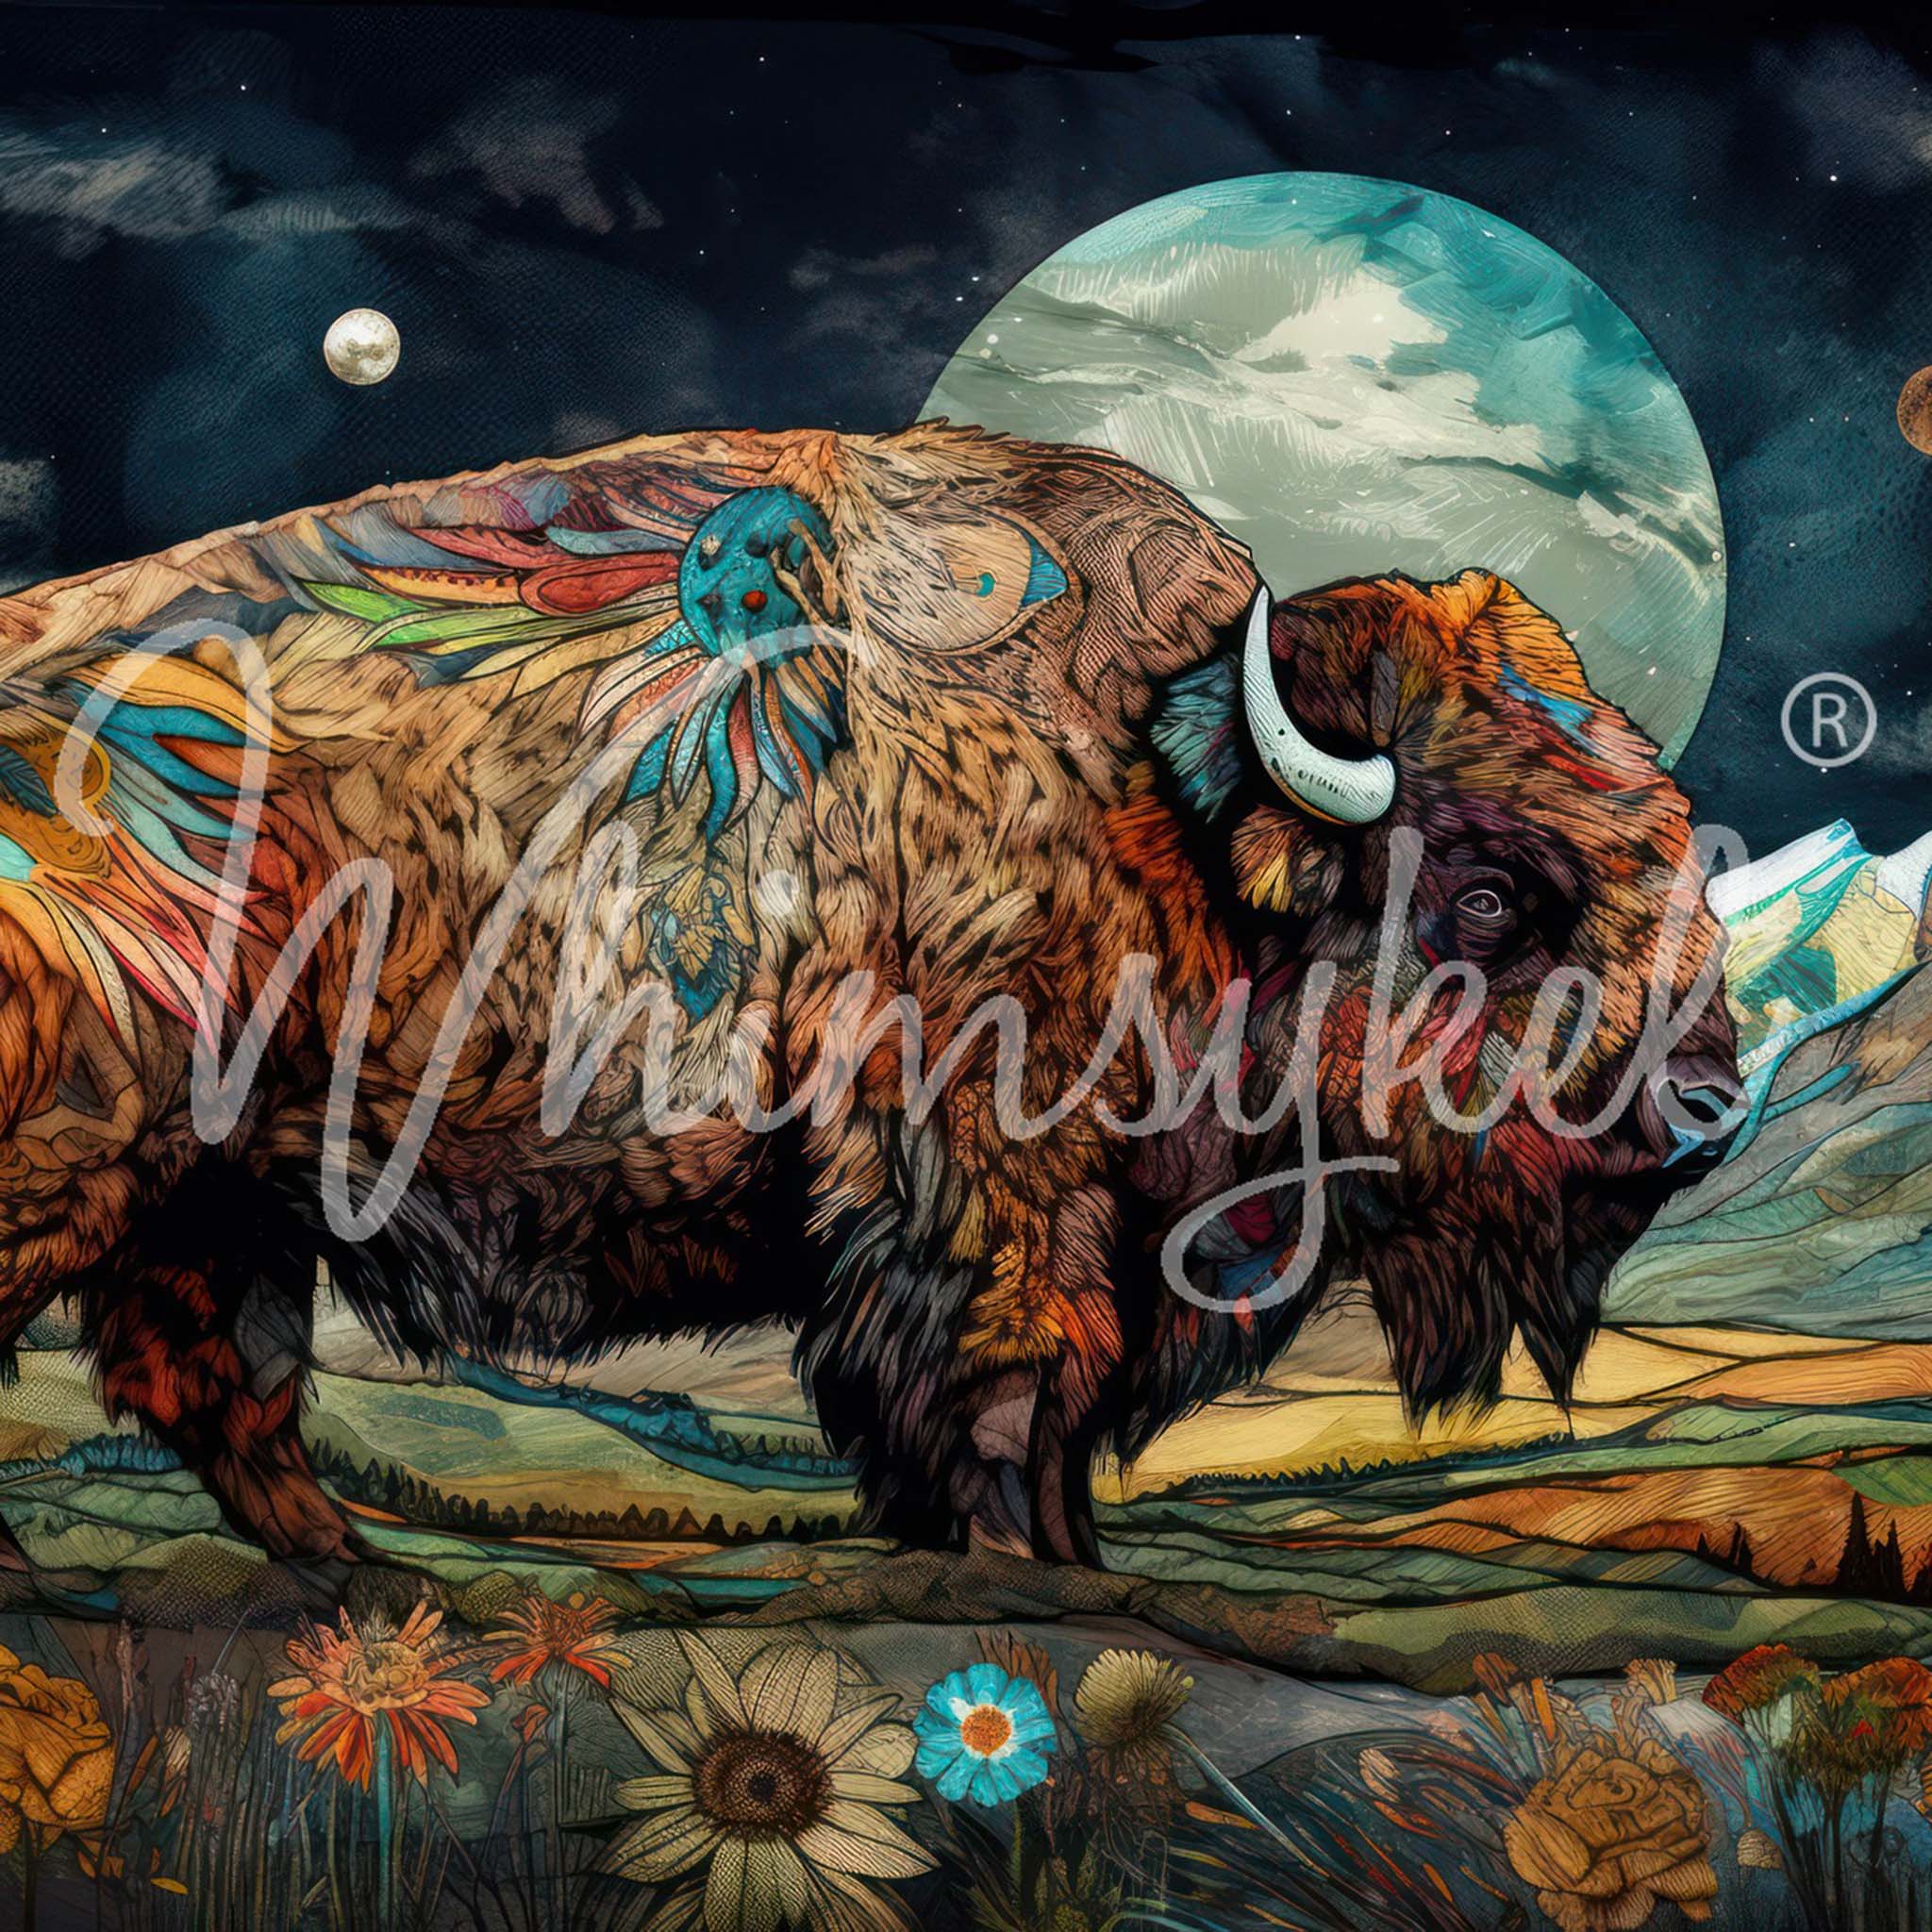 Close-up of a tissue paper design is a bohemian style tapestry of a buffalo against a mountainous background with a large full moon in a dark sky.